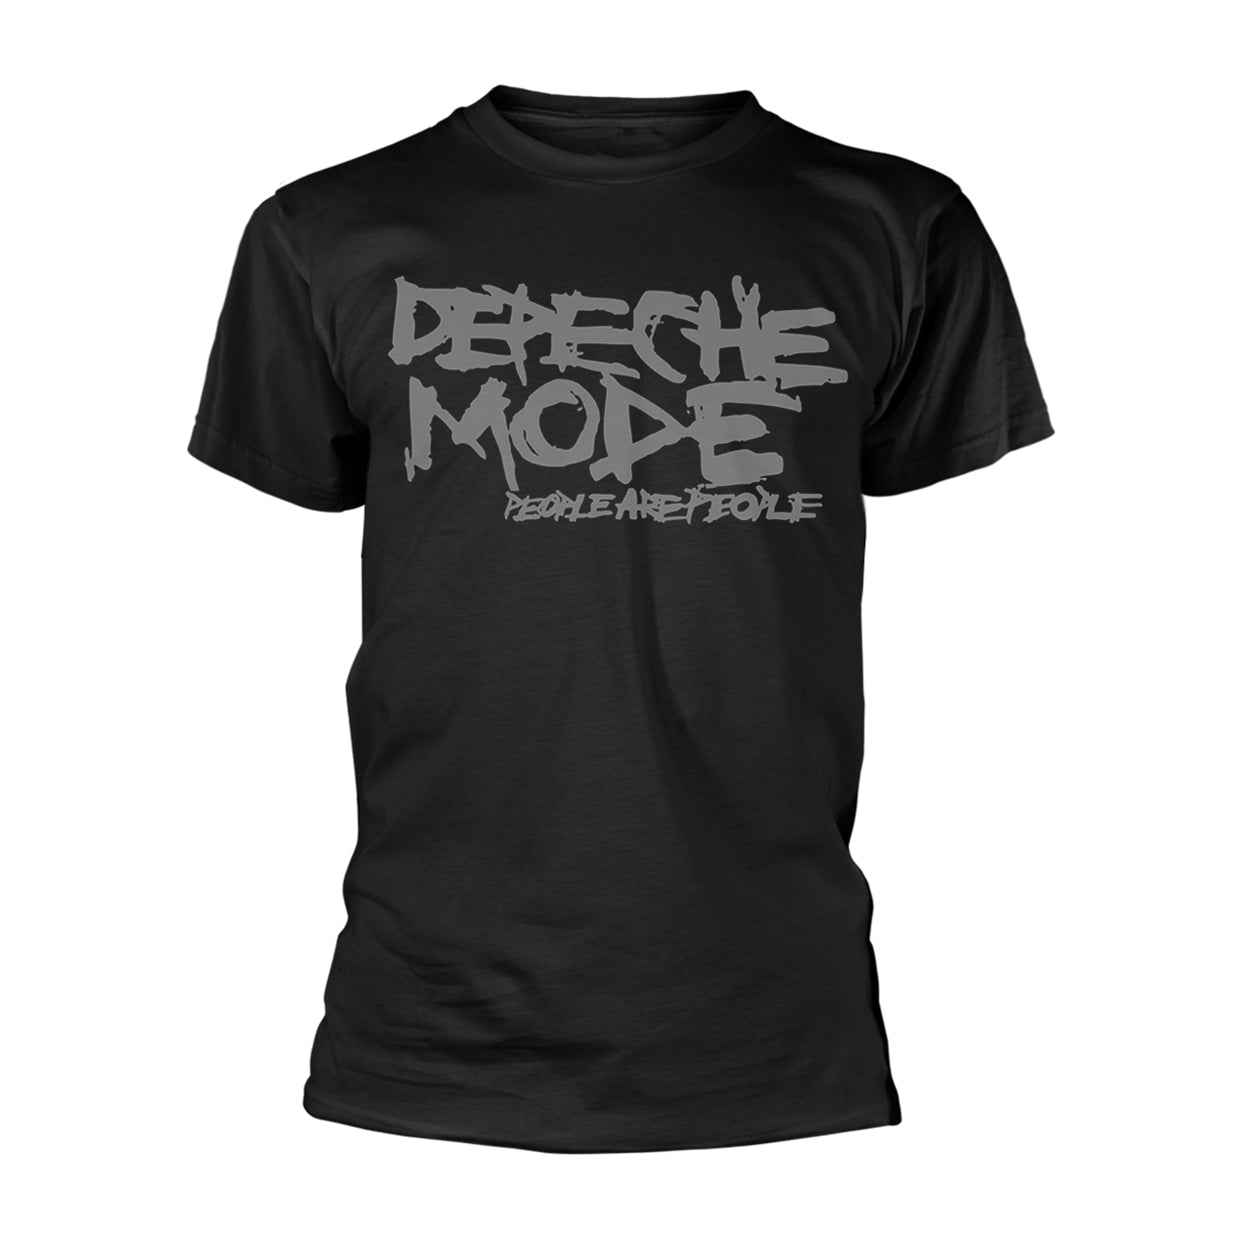 Depeche Mode "People Are People" T shirt